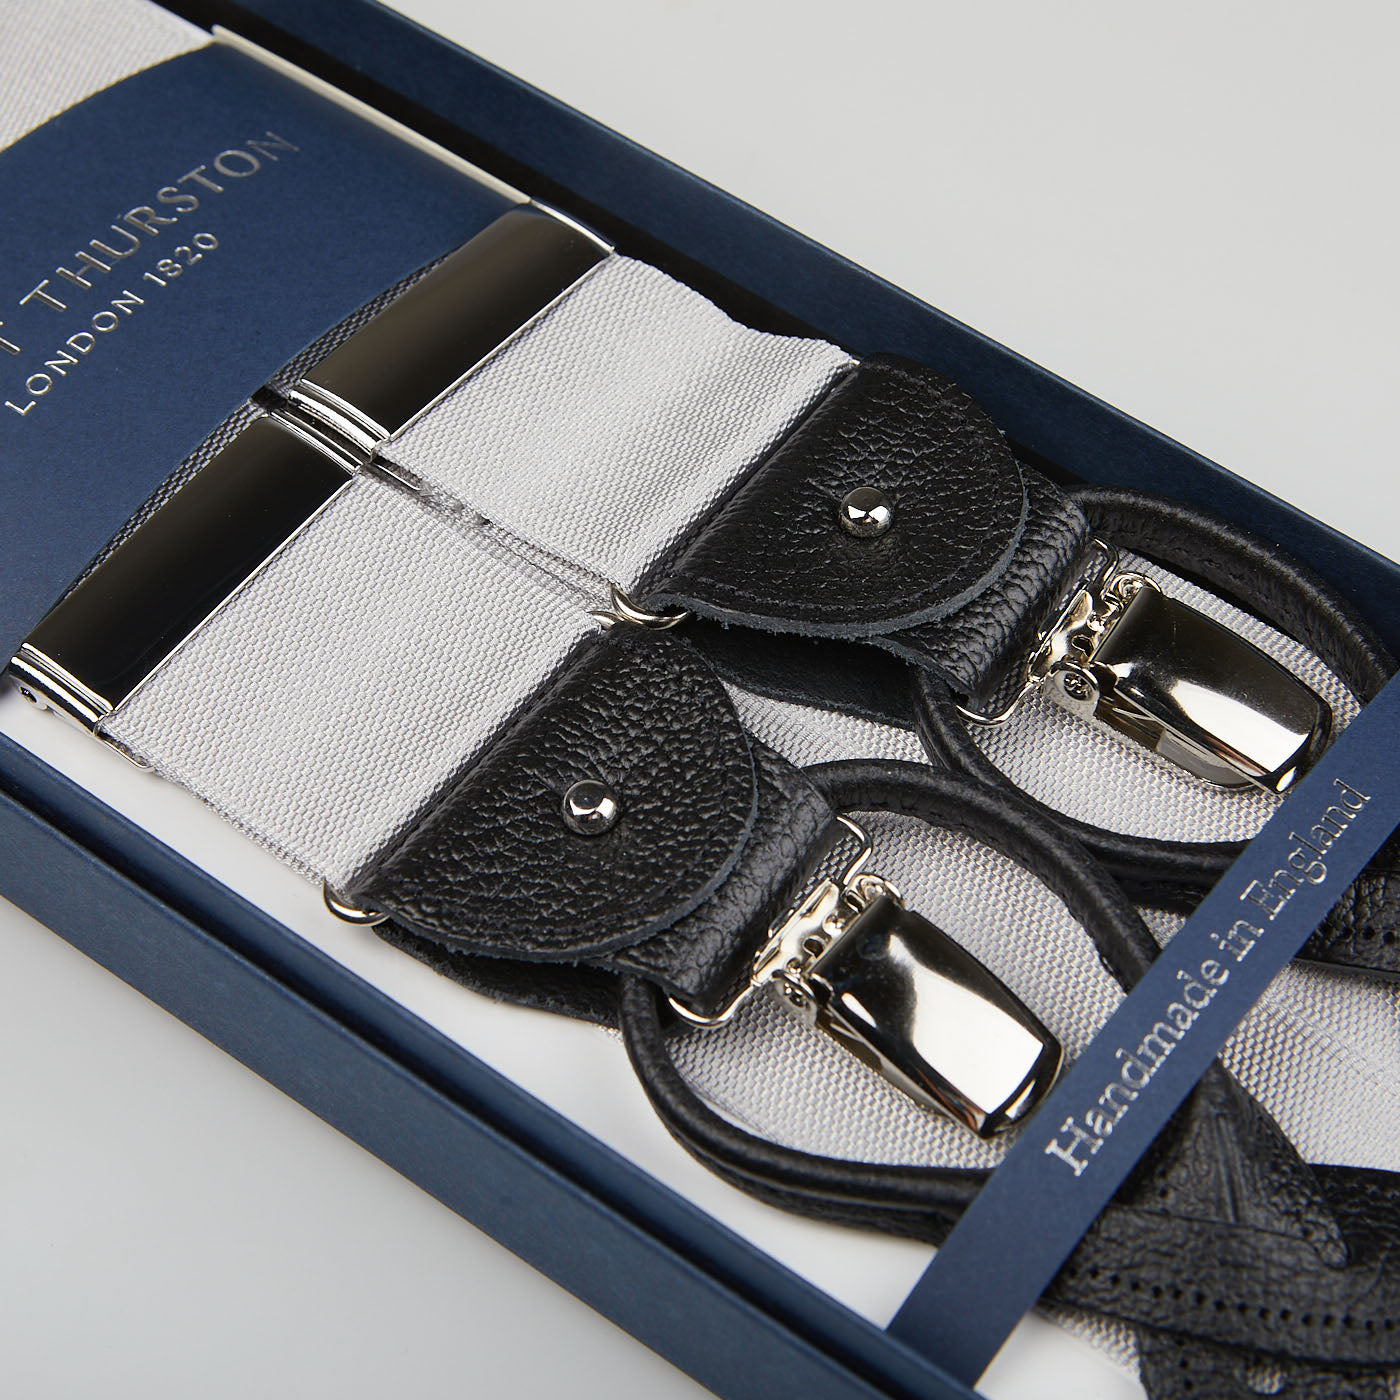 Luxury Silver Nylon Black Leather 40 mm braces with metal clasps, displayed in a navy blue presentation box labeled "Albert Thurston.